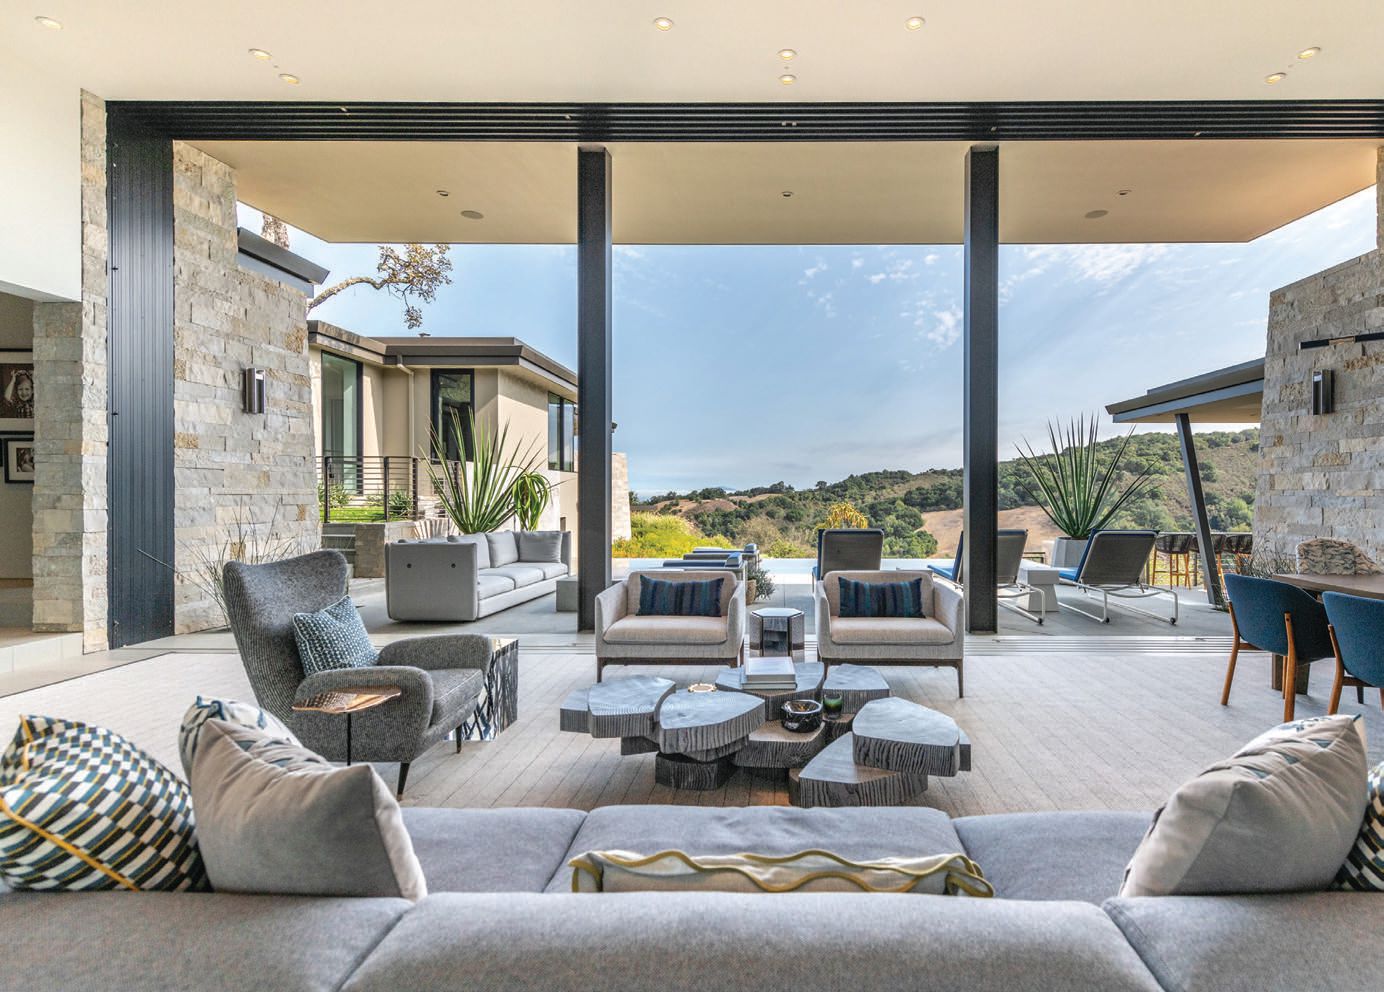 This extravagant home boasts incredible views complemented by thoughtful architecture and amenities like a breakfast bar and a home theater. PHOTO BY NATE DONOVAN/COURTESY OF GOLDEN GATE SOTHEBY’S INTERNATIONAL REALTY